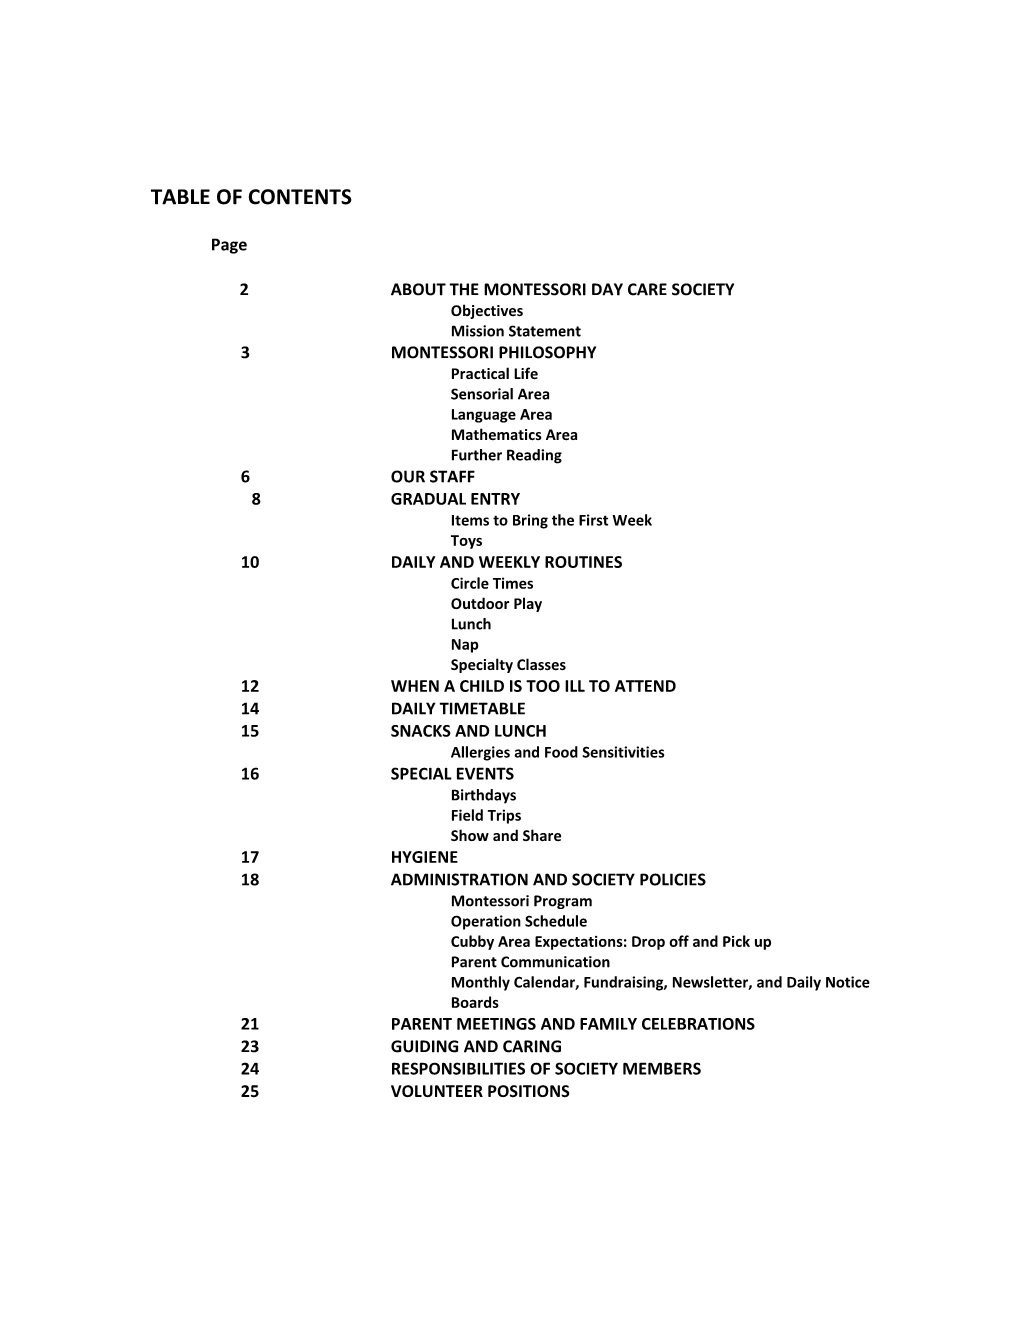 Table of Contents s201